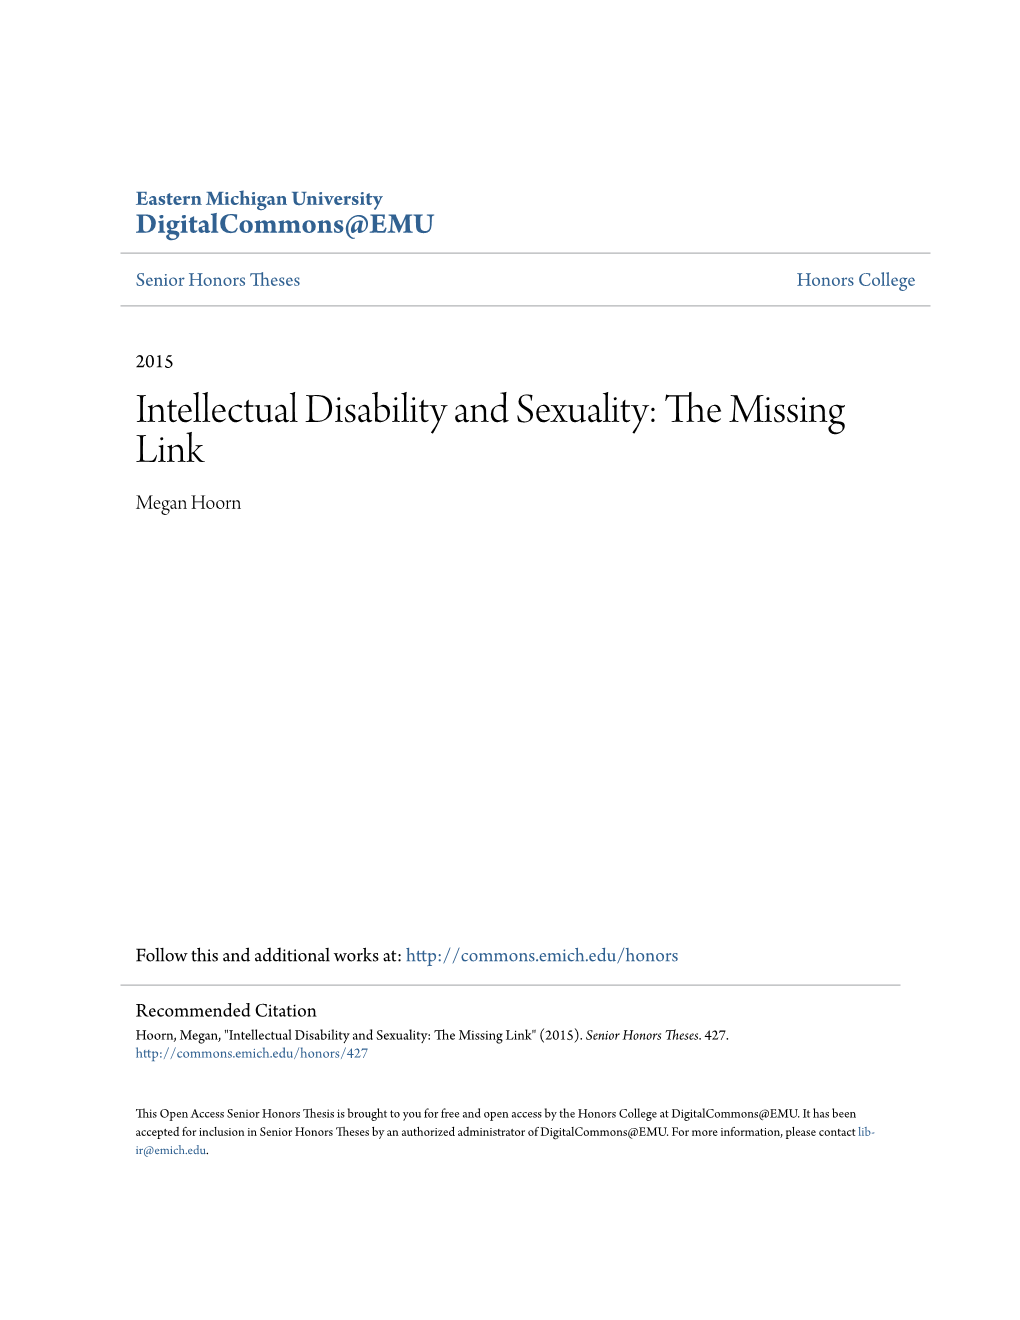 Intellectual Disability and Sexuality: the Missing Link